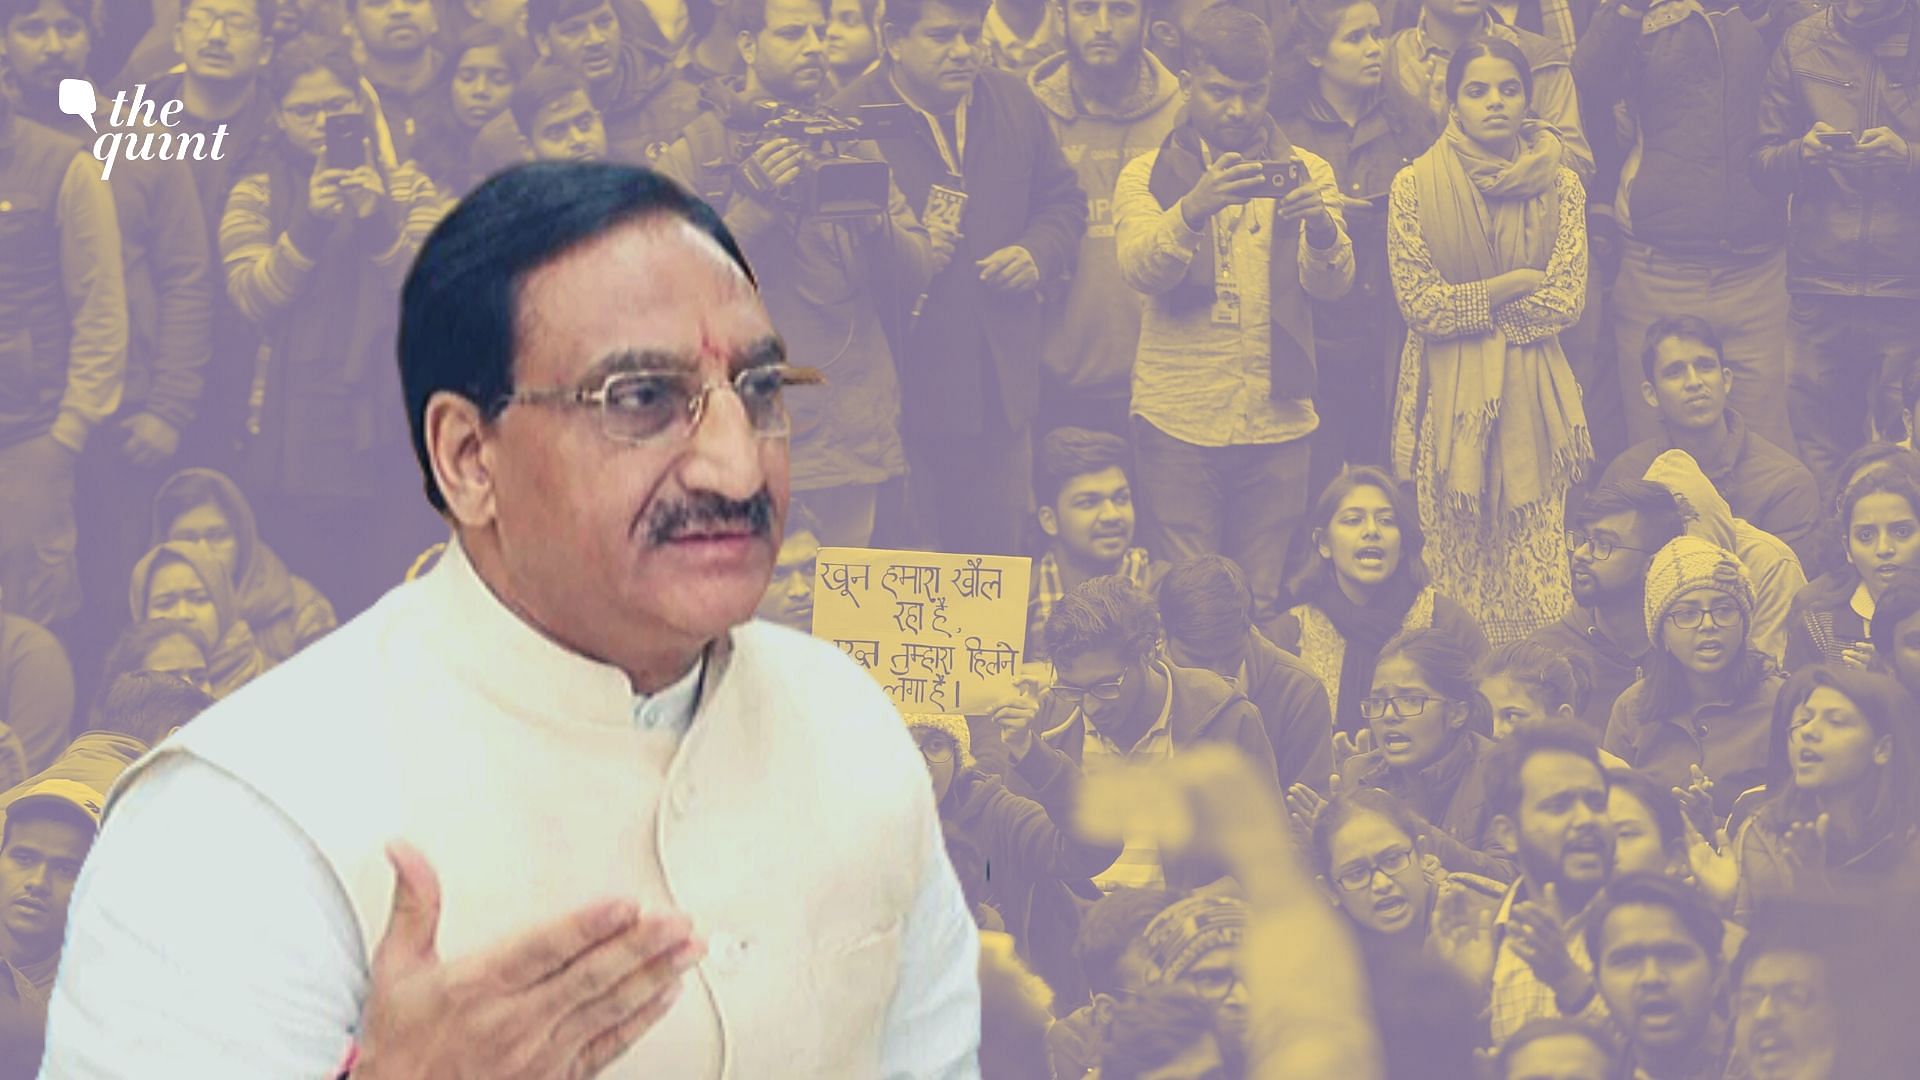 “Educational institutions should not be used for political purposes,” Ramesh Pokhriyal said.